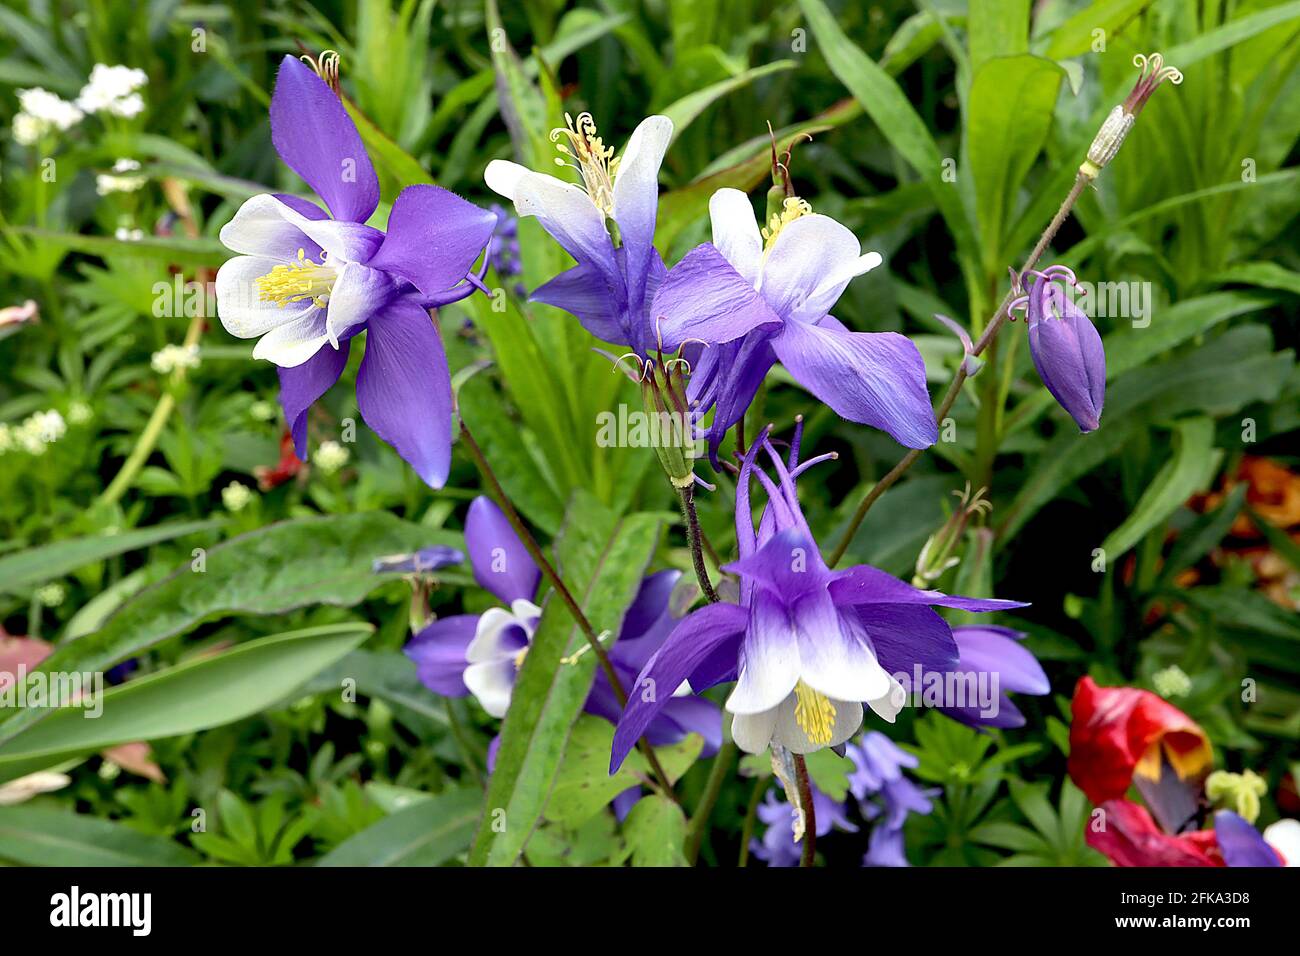 Aquilegia vulgaris ‘Winky Blue and White’ Columbine or Granny’s bonnet Winky Blue and White – purple flowers with curved spurs,  April, England, UK Stock Photo